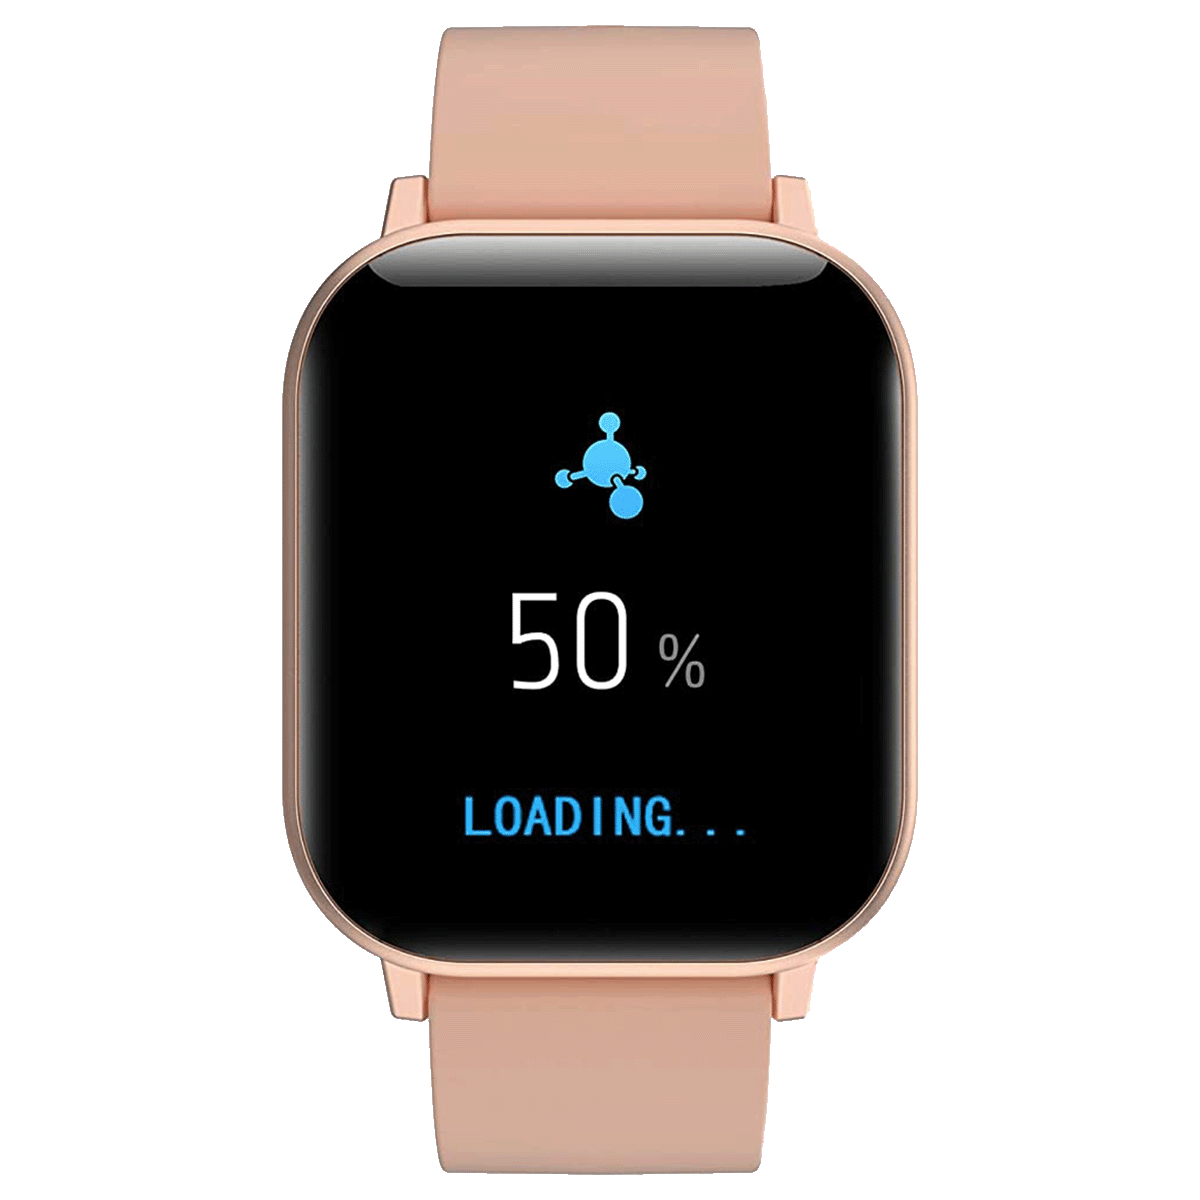 Small Business Smart Watches | Comcast Business Mobile